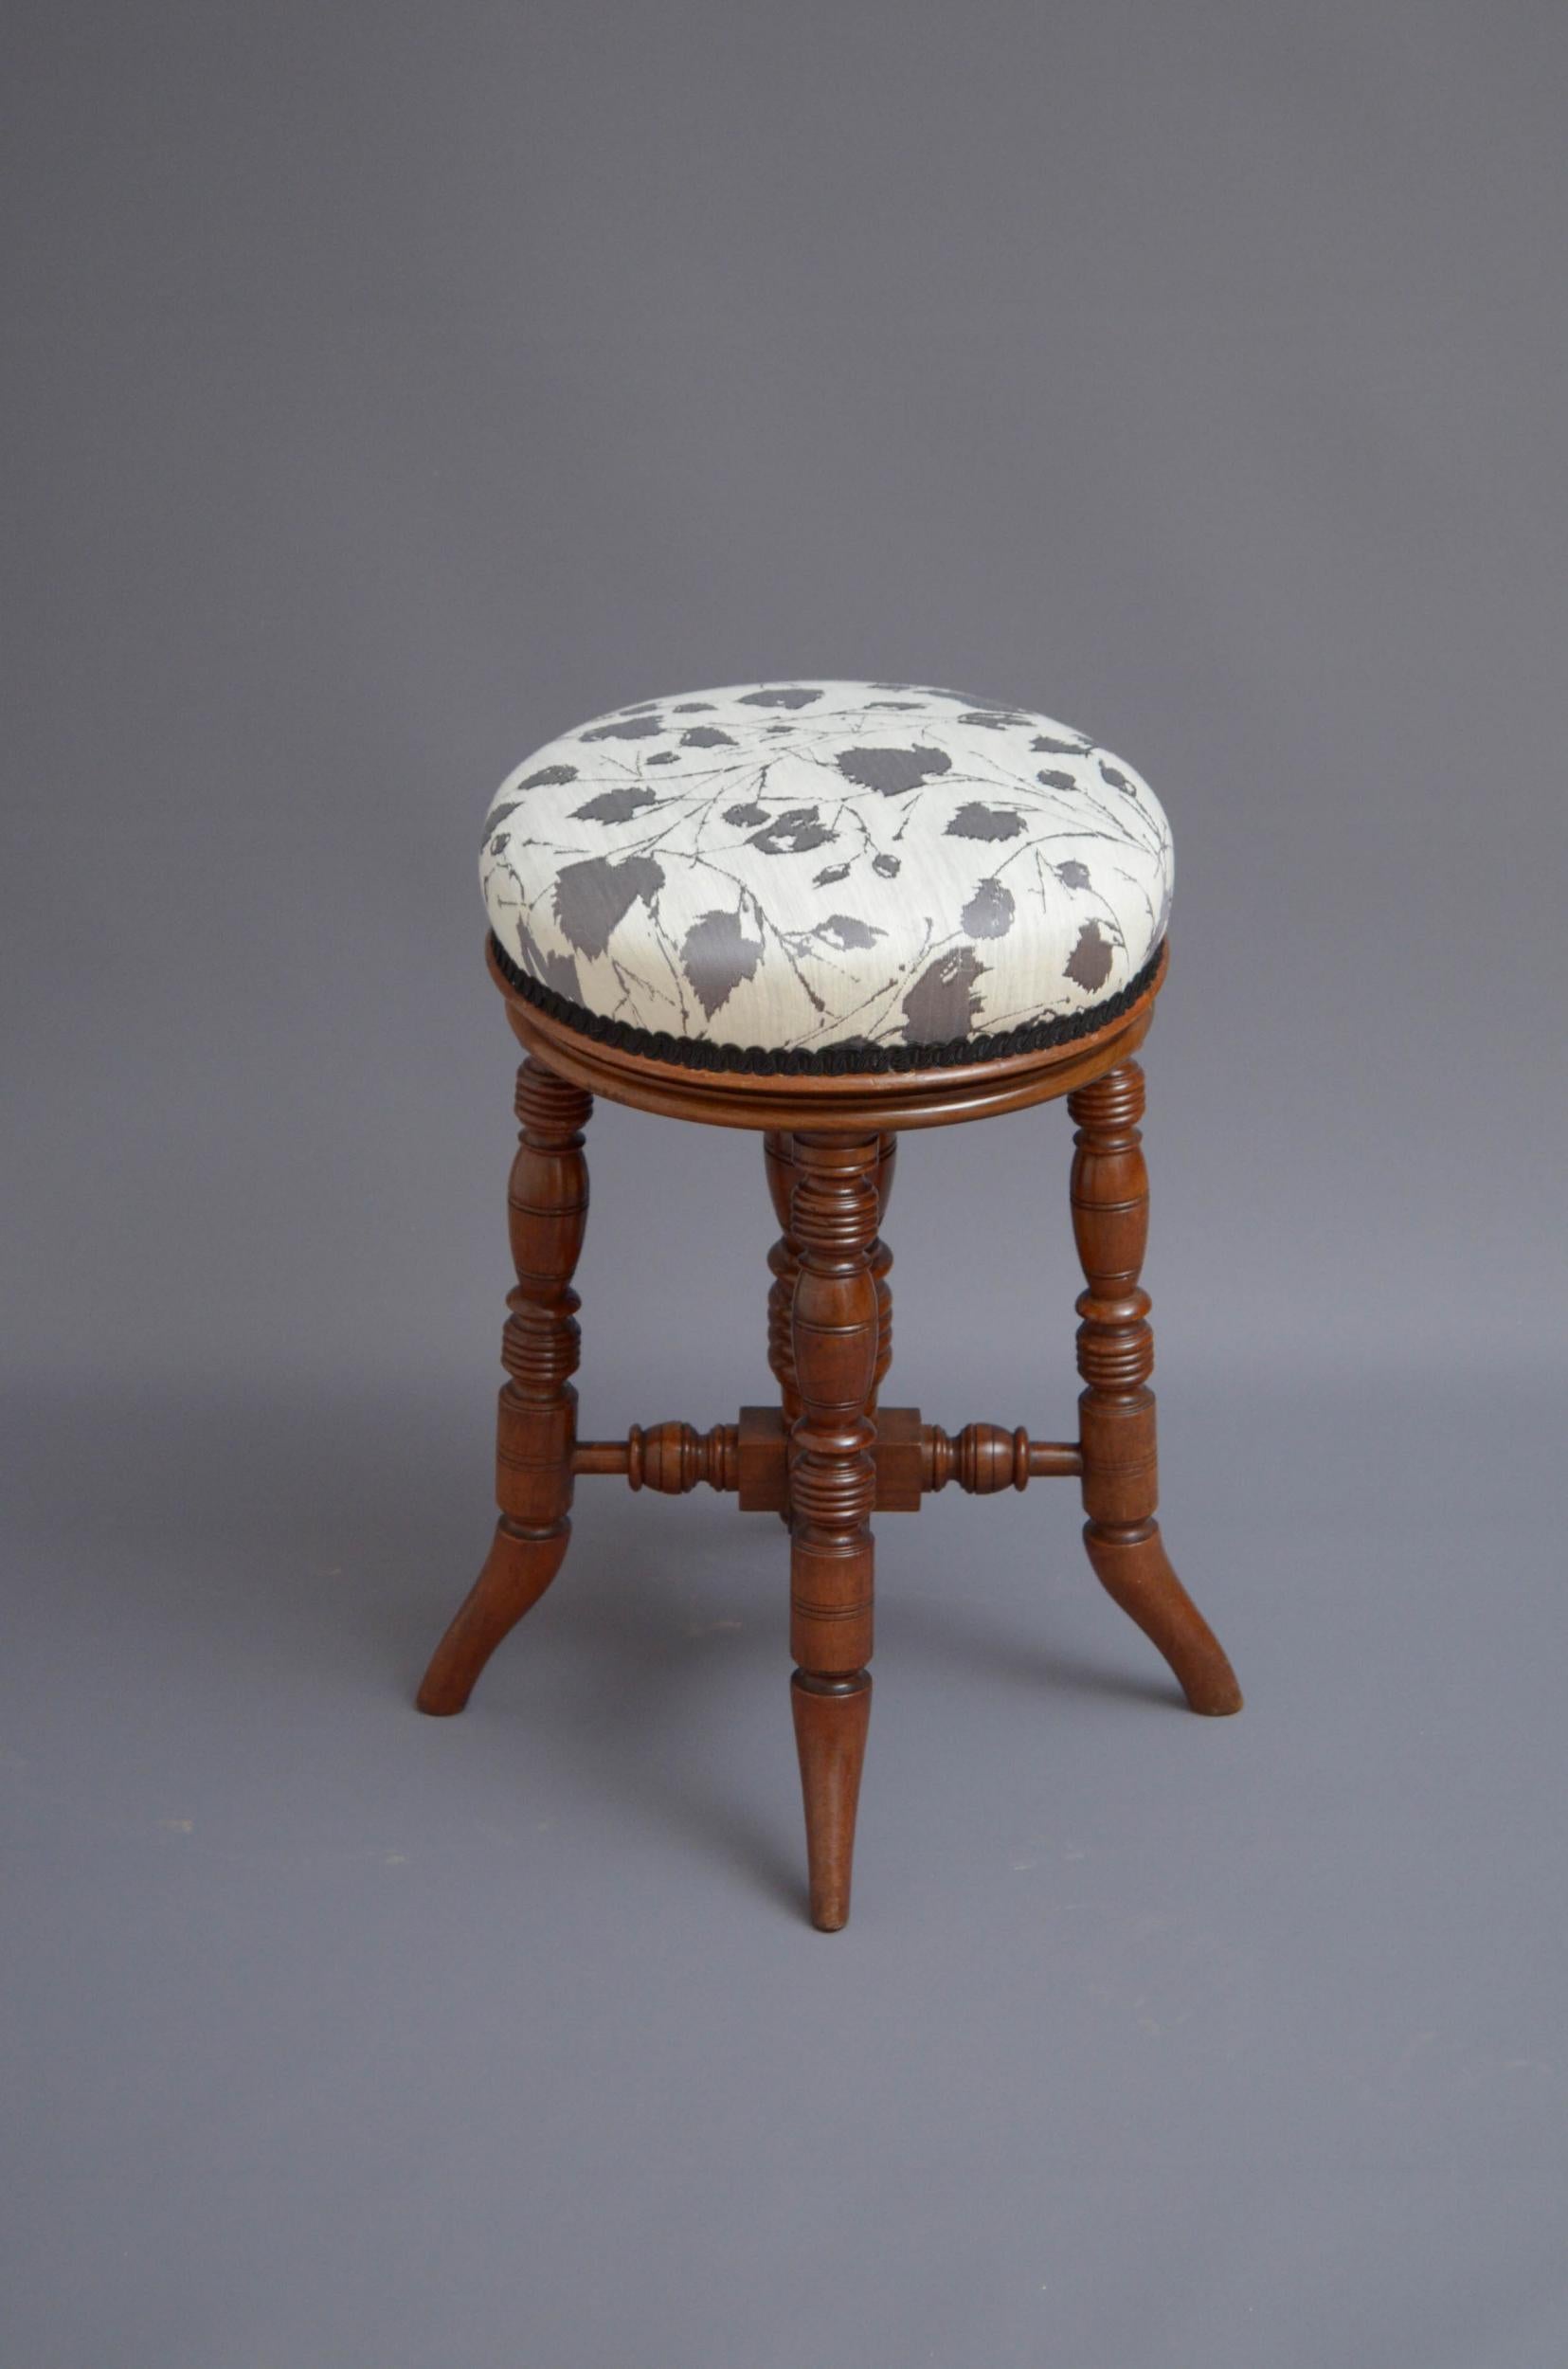 Sn4907 Edwardian piano or dressing table stool in walnut, having height adjustable seat and four turned and ringed outswept legs united by cross stretchers. This antique stool has been sympathetically restored and is ready to use at home, circa